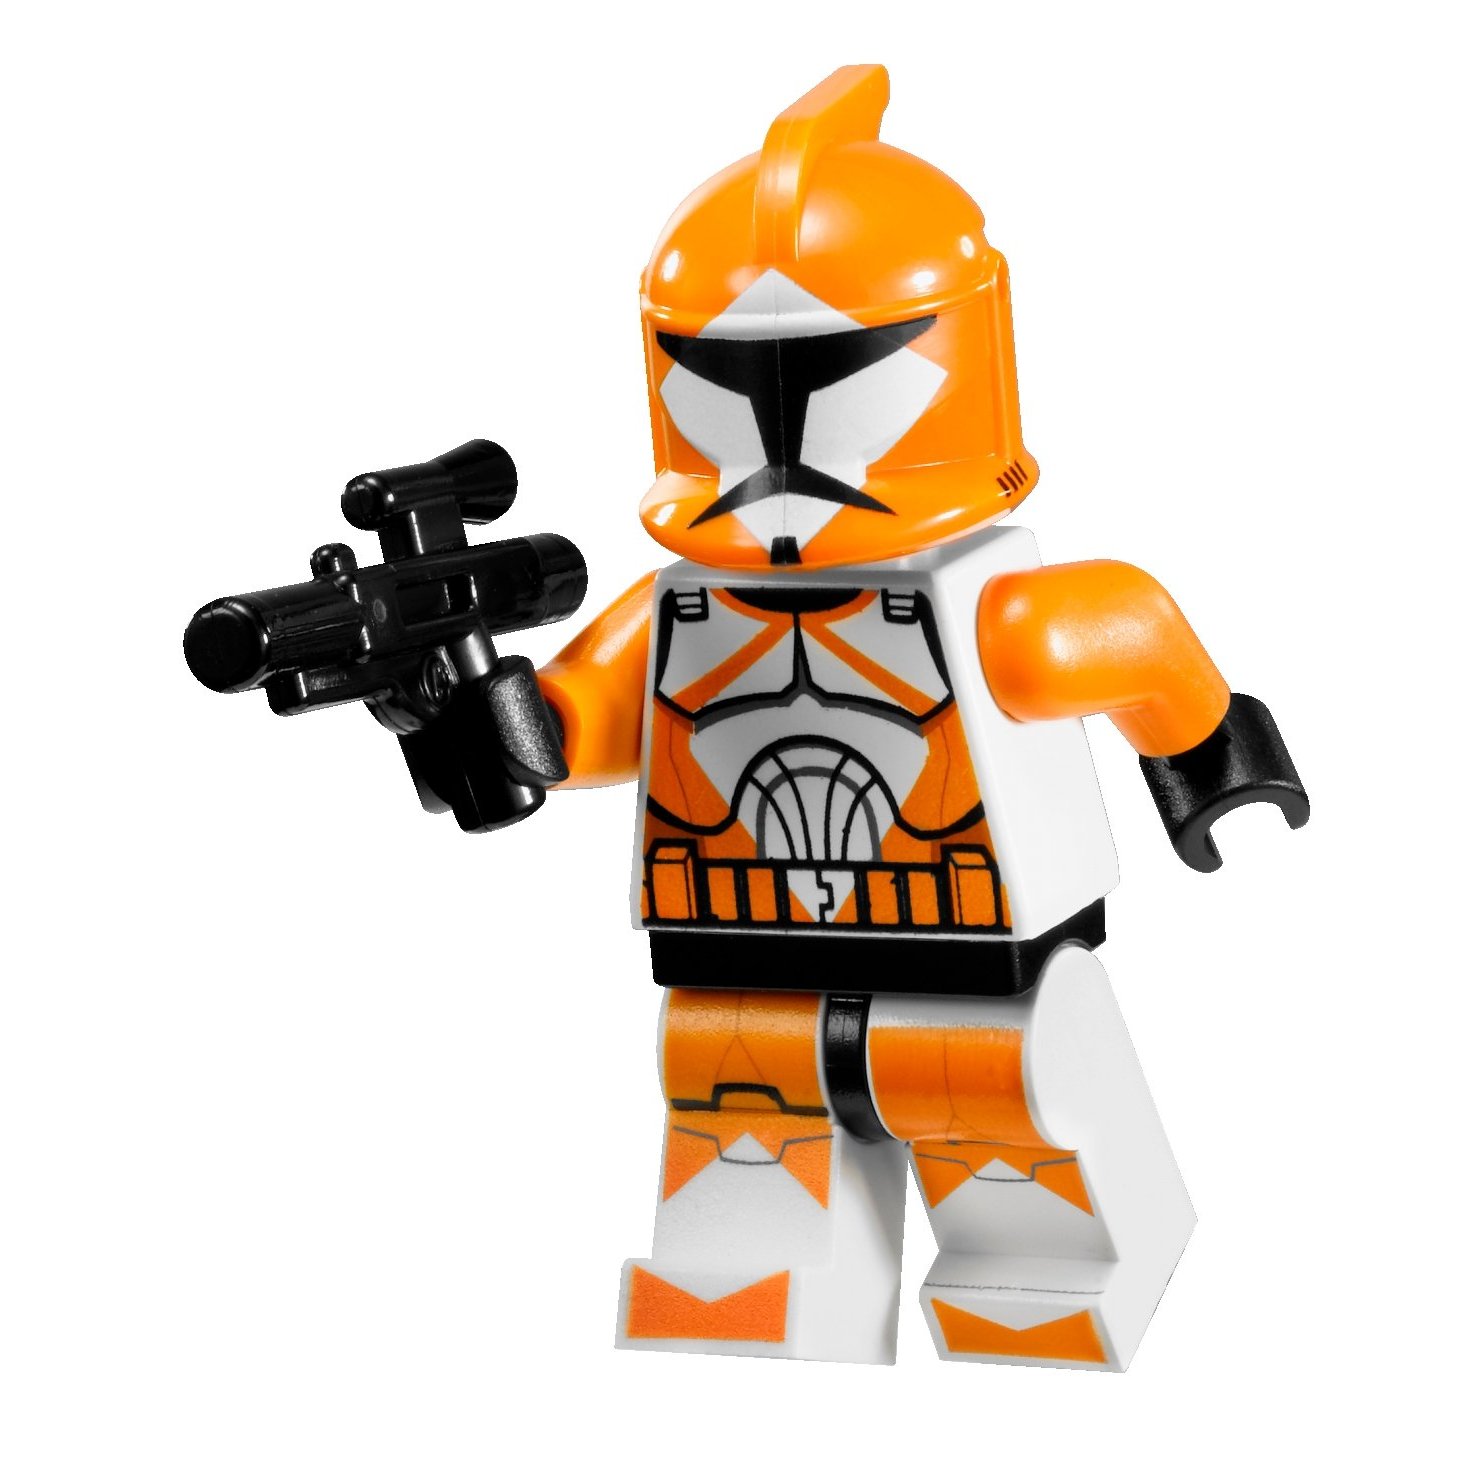 Lego star wars clipart 2 - WikiClipArt